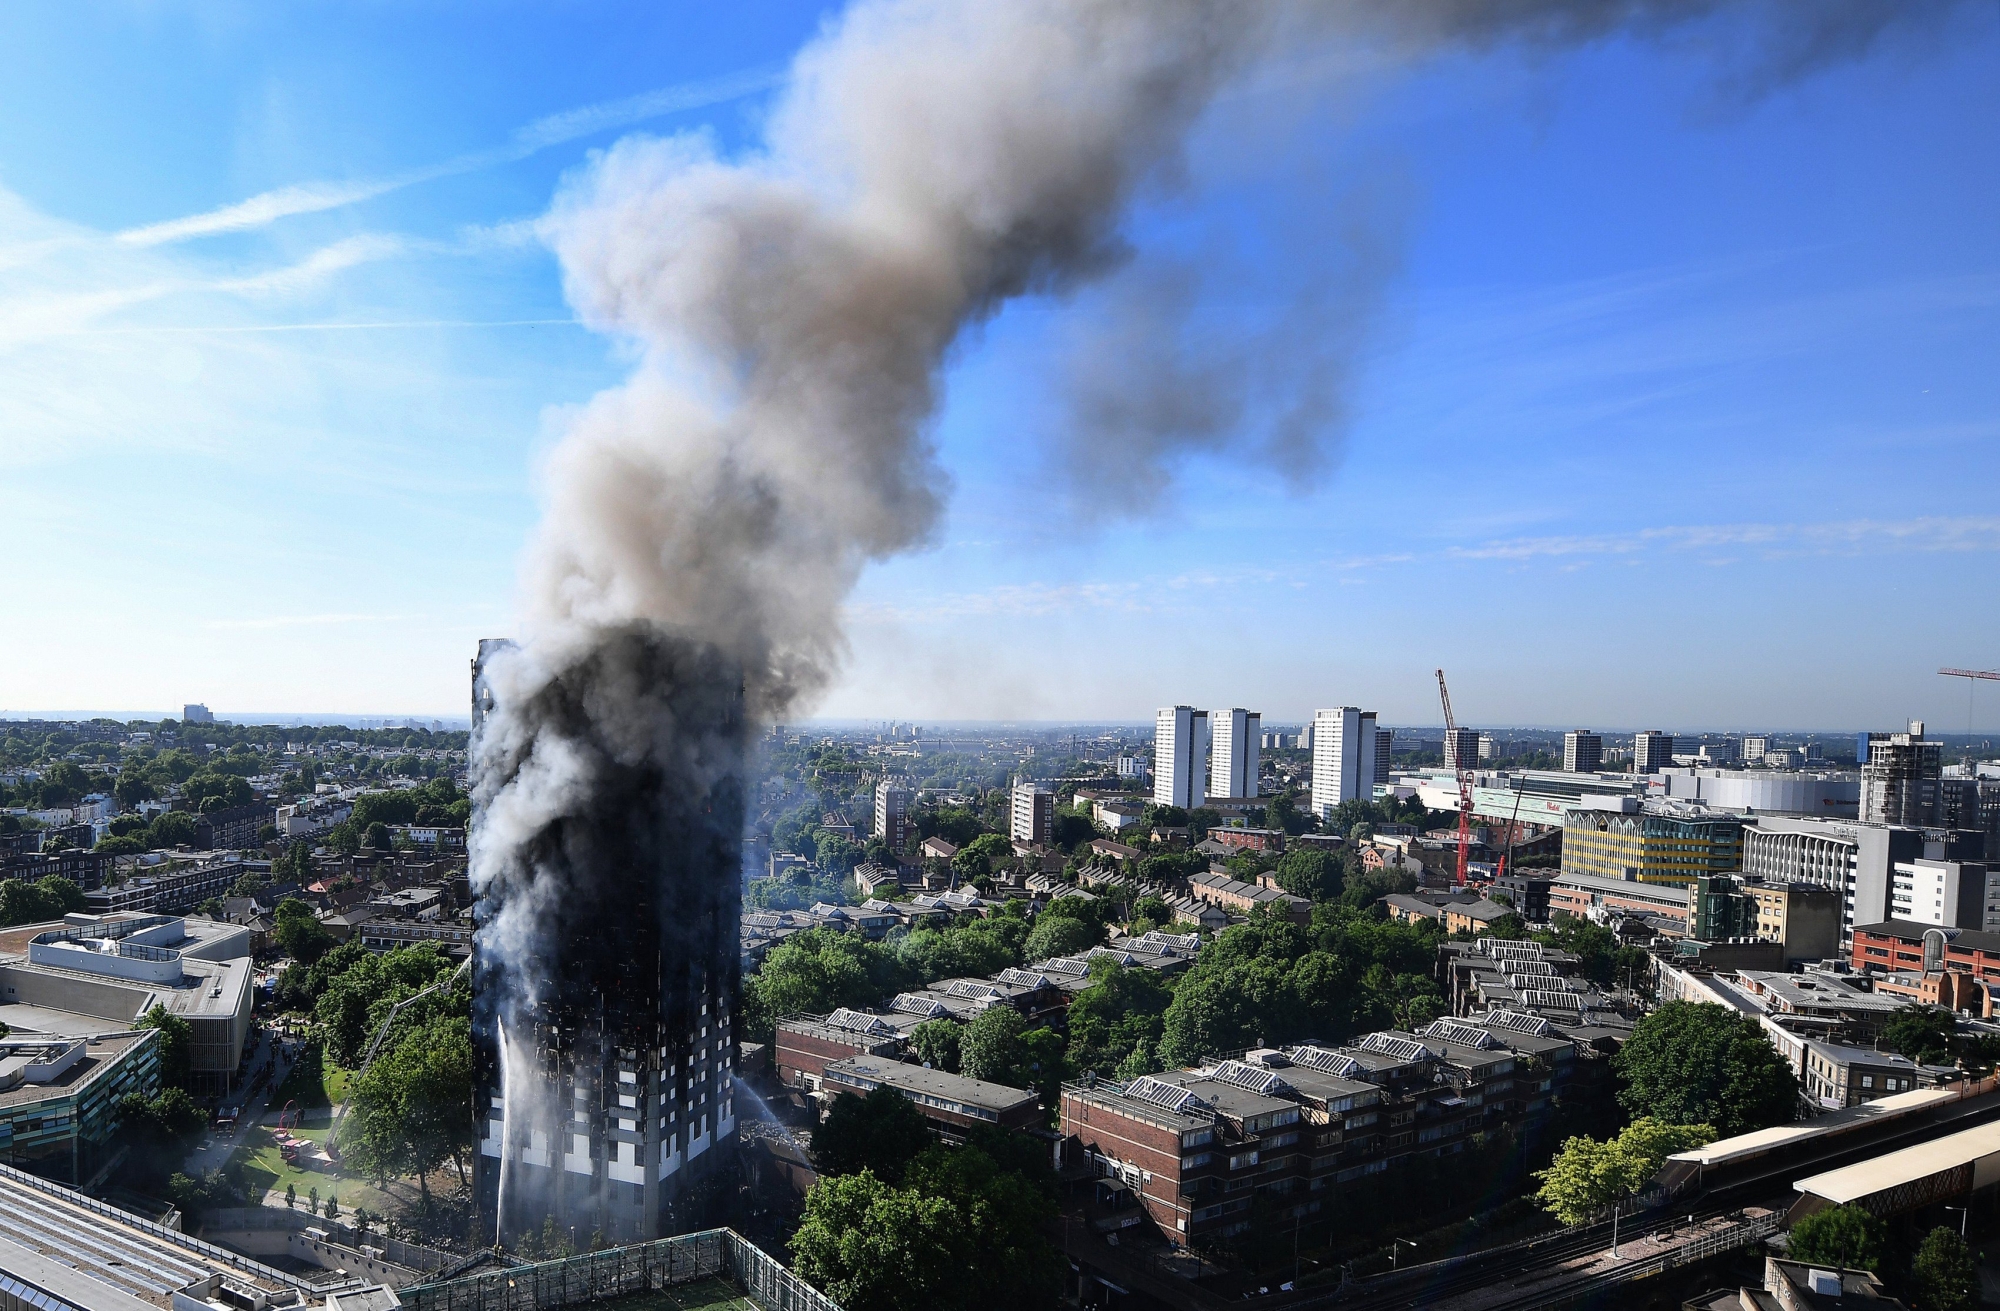 epa06027804 A view on the burning Grenfell Tower, a 24-storey apartment block in North Kensington, London, Britain, 14 June 2017. According to the London Fire Brigade (LFB), 40 fire engines and 200 firefighters are working to put out the blaze. Residents in the tower were evacuated, a number of people were treated for a 'range of injuries,' and six people have died in a fire, Metropolitan Police said. The blaze broke out at around 1:00 am GMT. An unconfirmed number of fatalities were reported in the incident, London Fire Commissioner Dany Cotton said during a press conference. The cause of the fire is yet not known.  EPA/ANDY RAIN BRITAIN LONDON FIRE